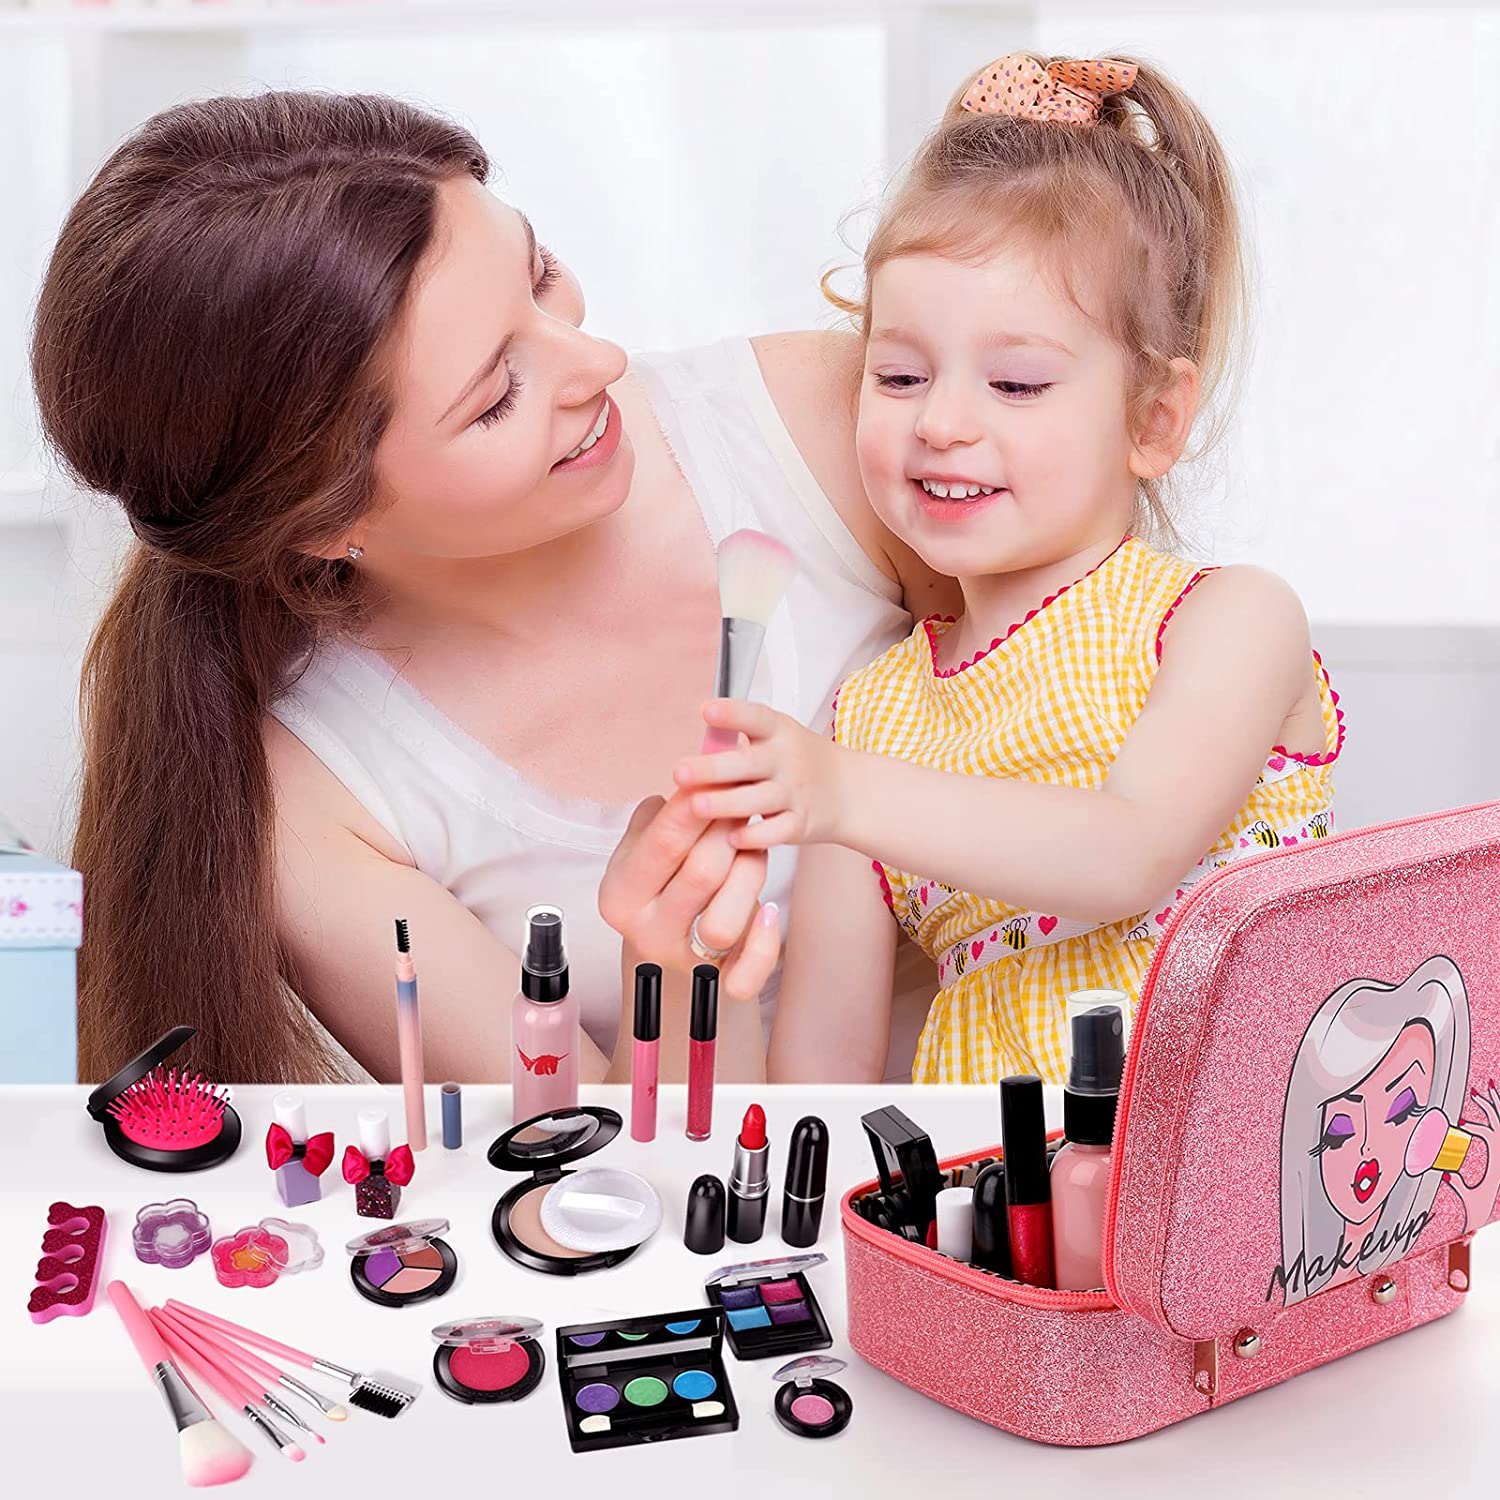 Girl Toys Birthday Gifts, Real Kids Makeup Kit for Little Girls Children Toddlers 4 5 6 7 8 9 Year Old, Girl's, Size: 27 in